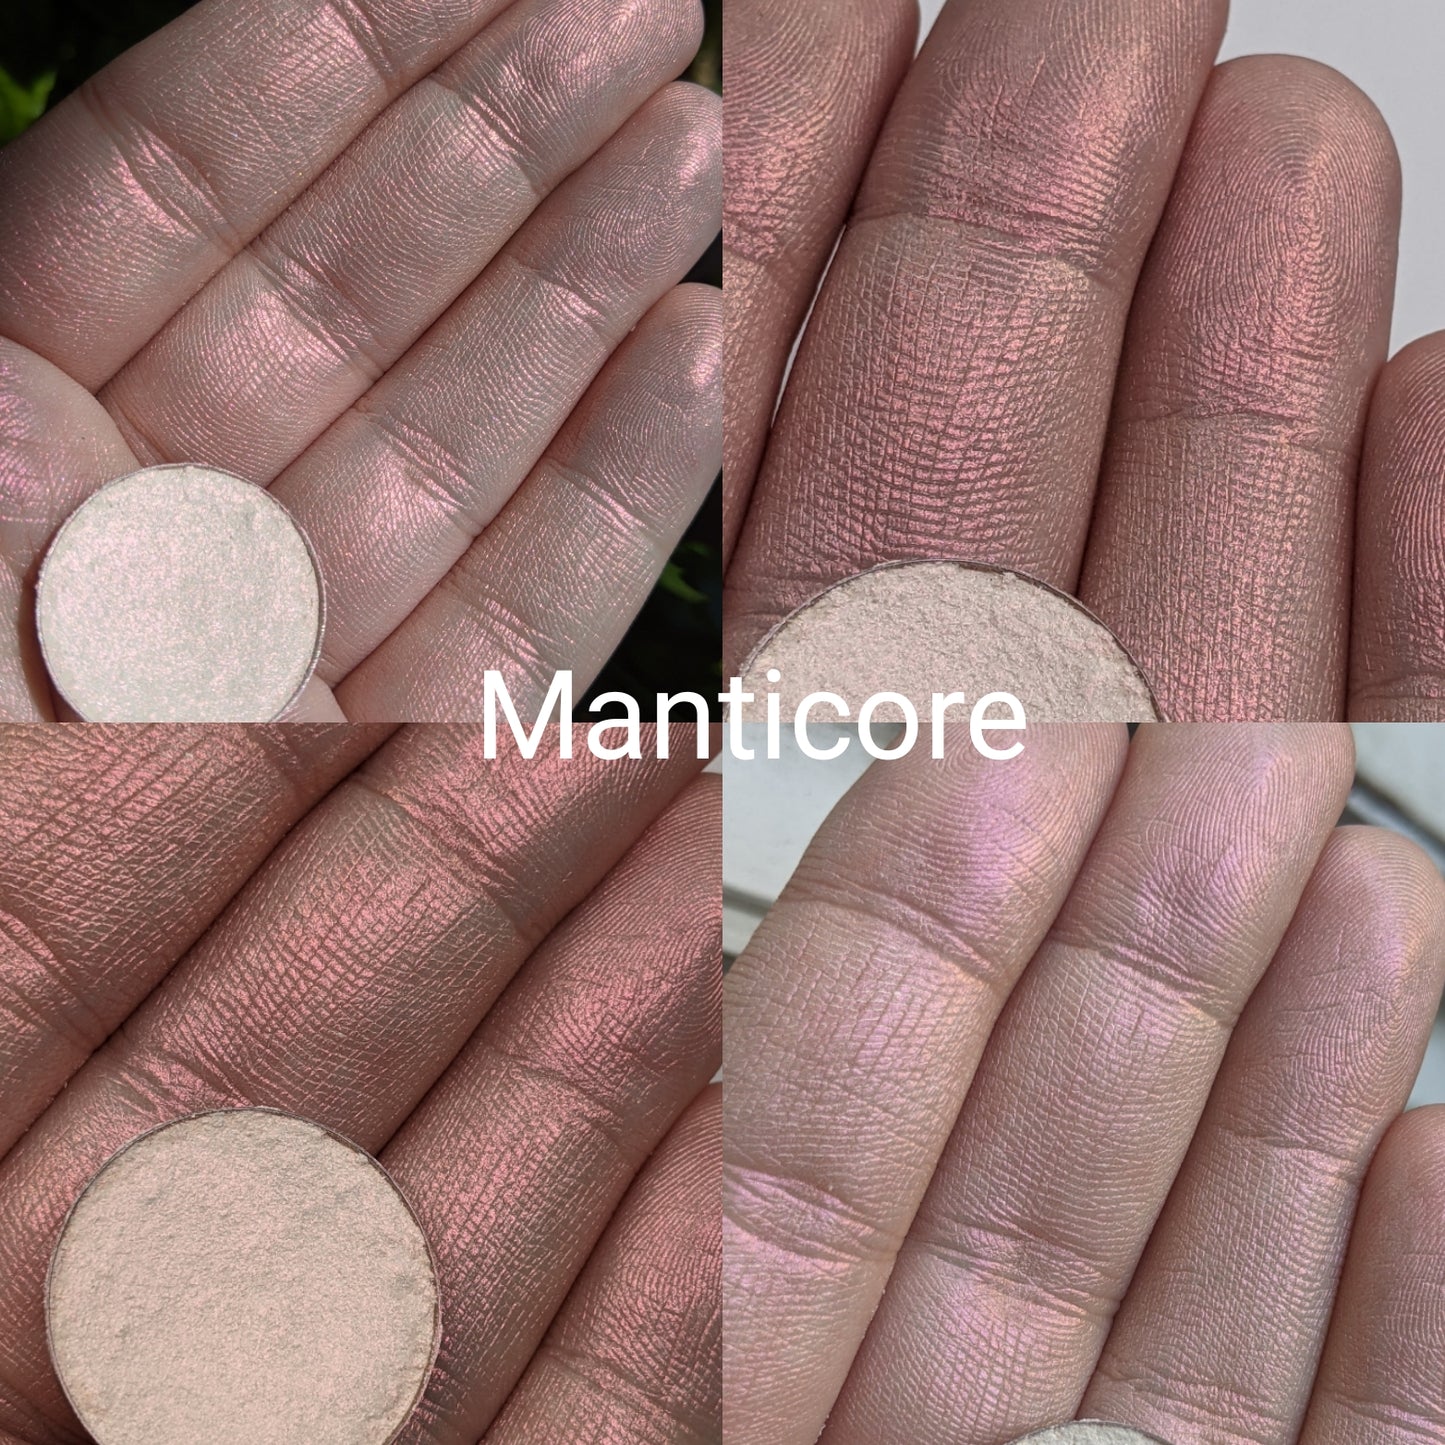 Manticore - Eyeshadow Highlighter Duochrome/Multichrome Red Coppery Gold